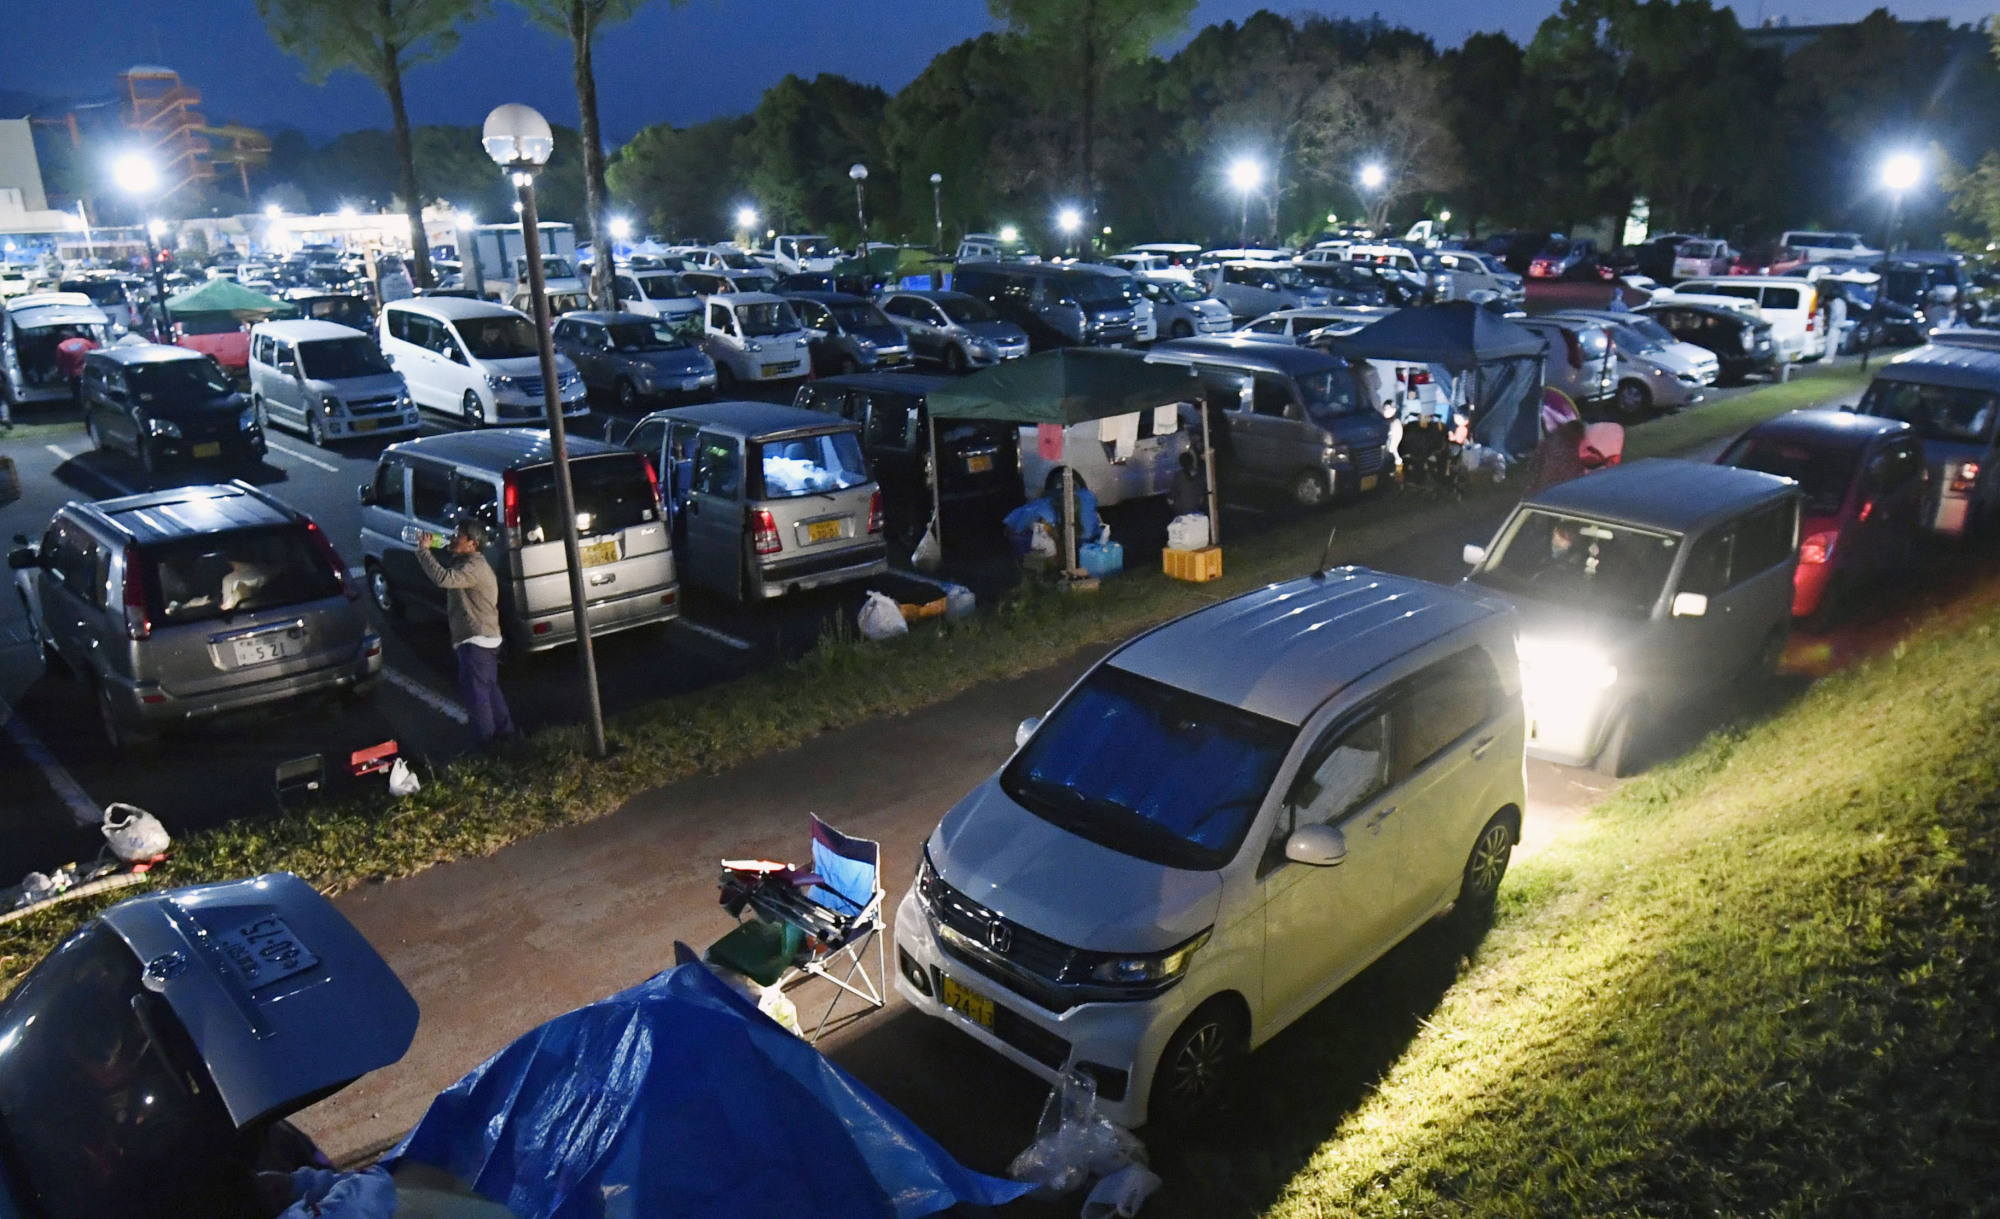 A parking lot in the town of Mashiki, Kumamoto Prefecture, is packed with vehicles after strong earthquakes hit the region in April 2016. | KYODO